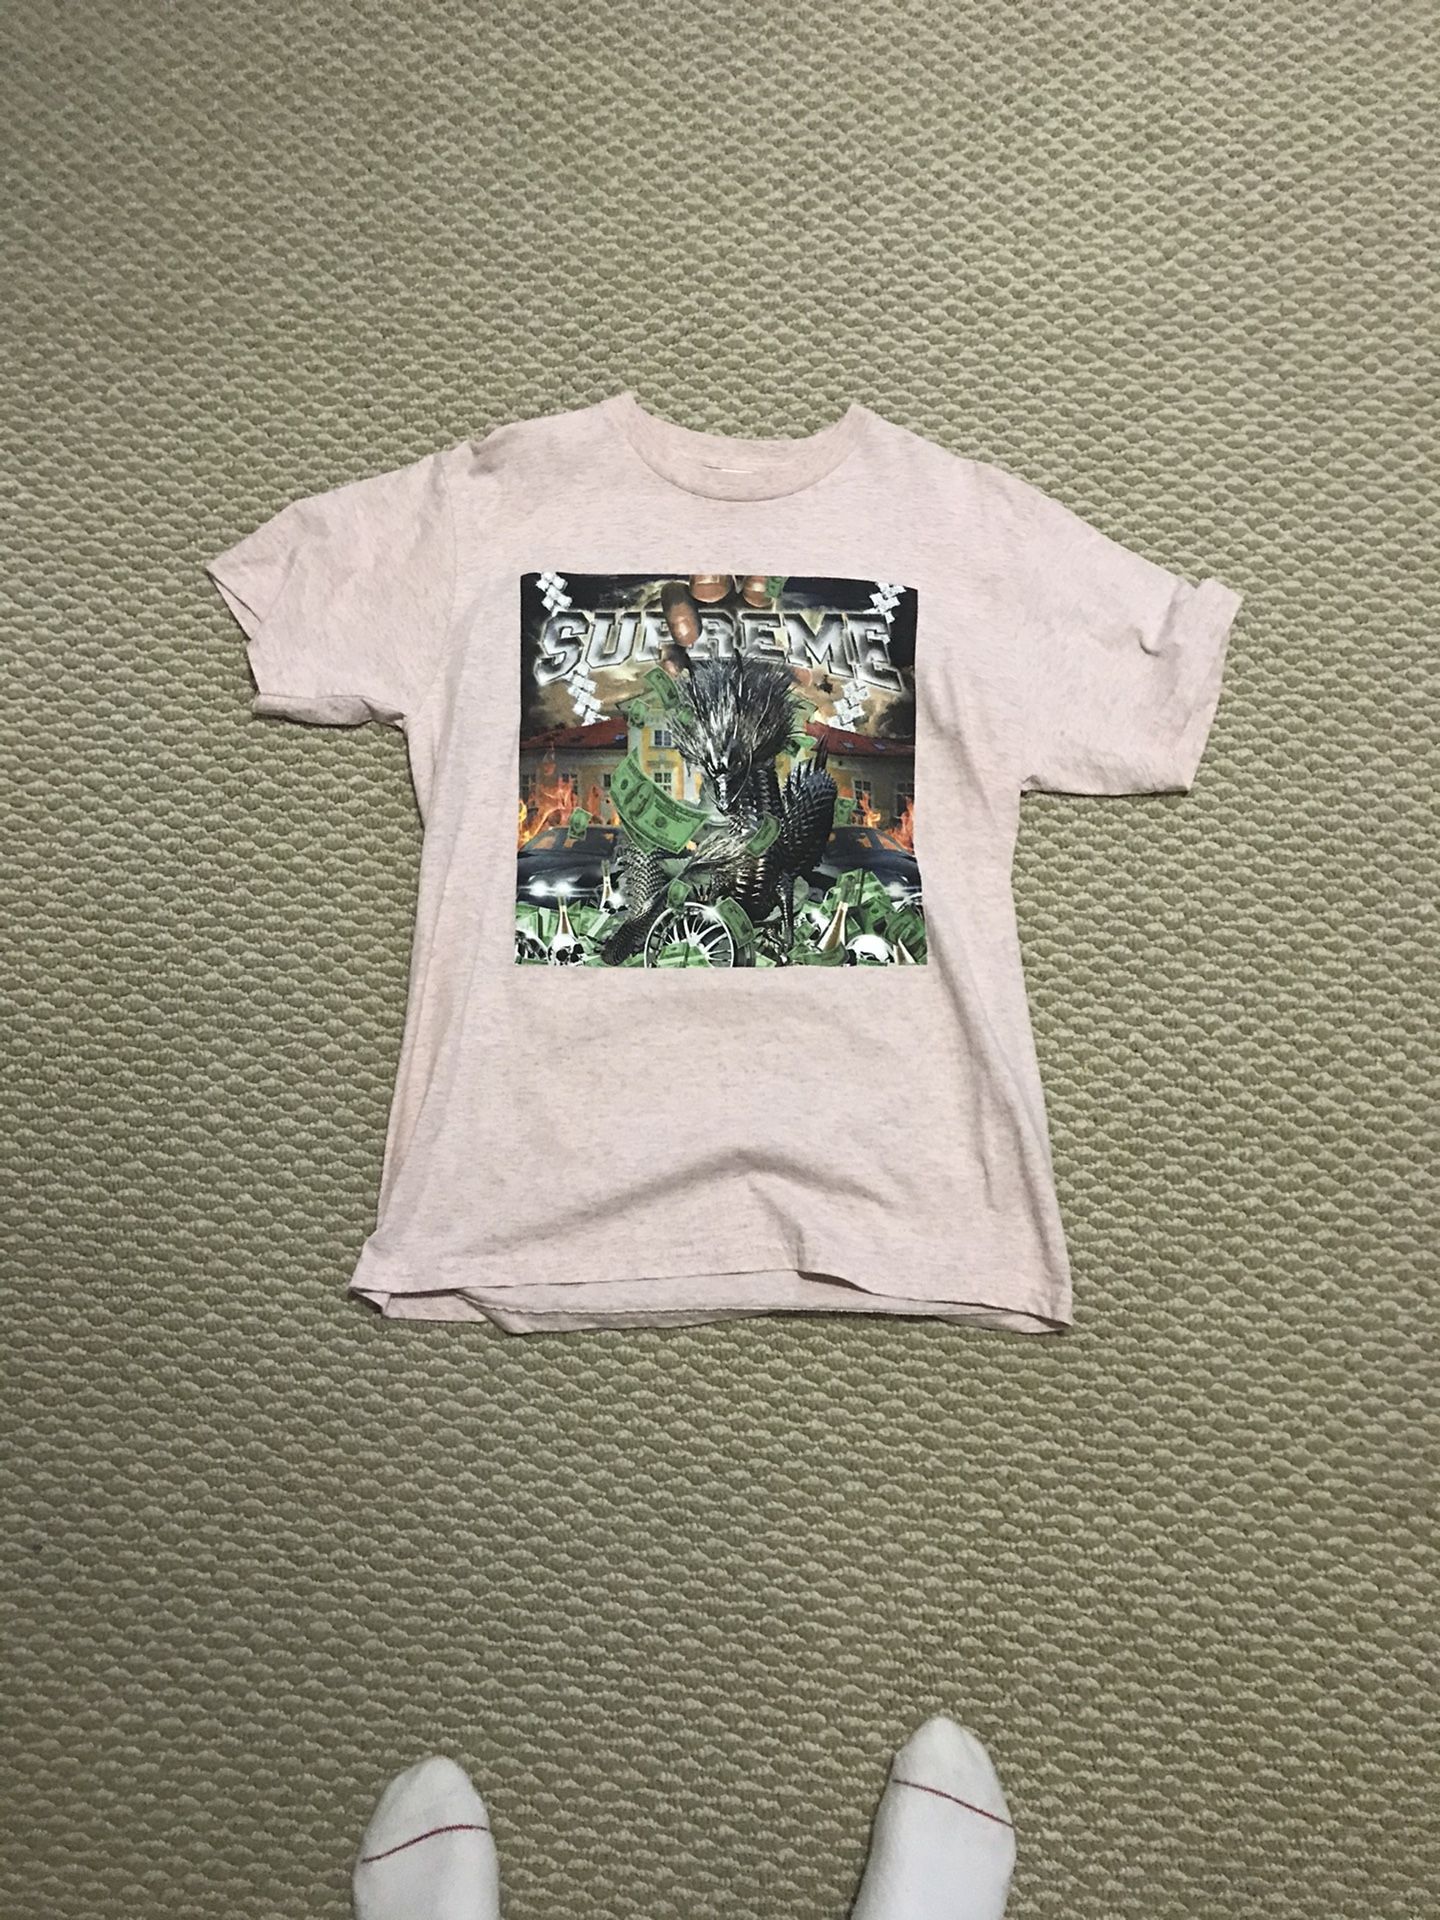 Supreme tee 2020 spring release